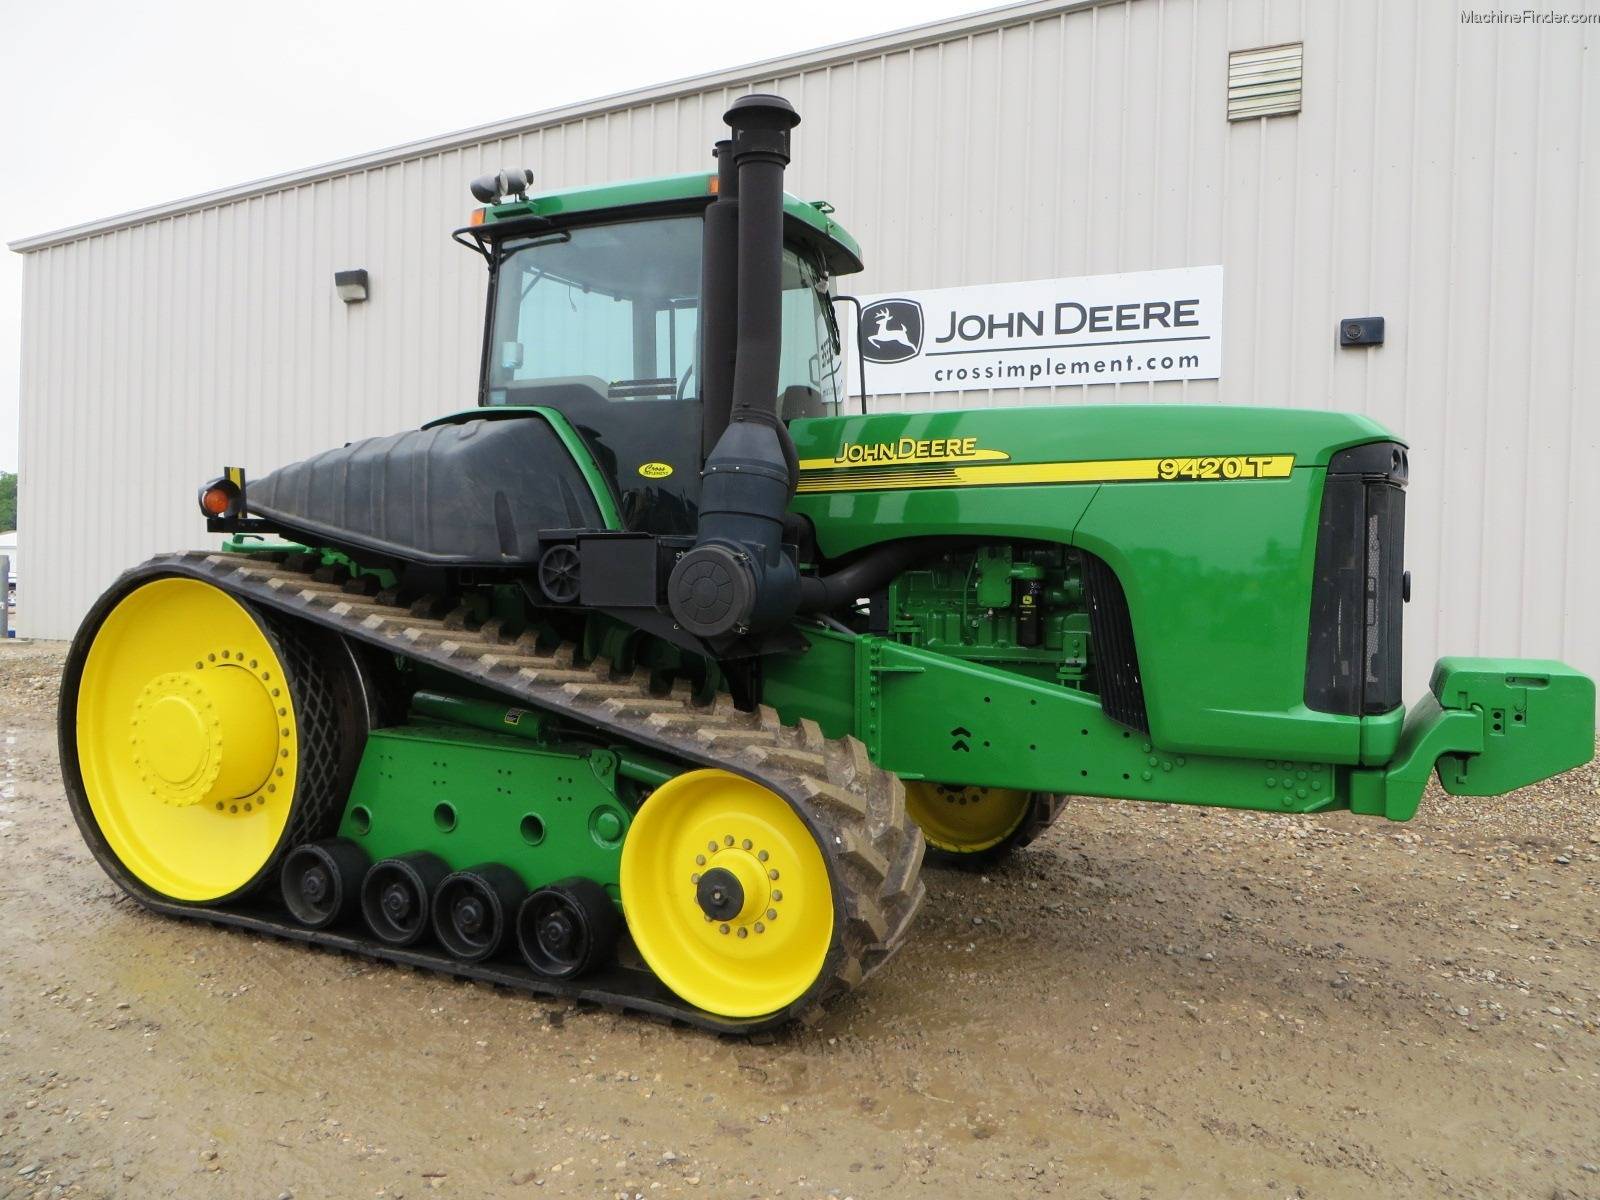 John deere 9420t specification • dimensions ••• agrister